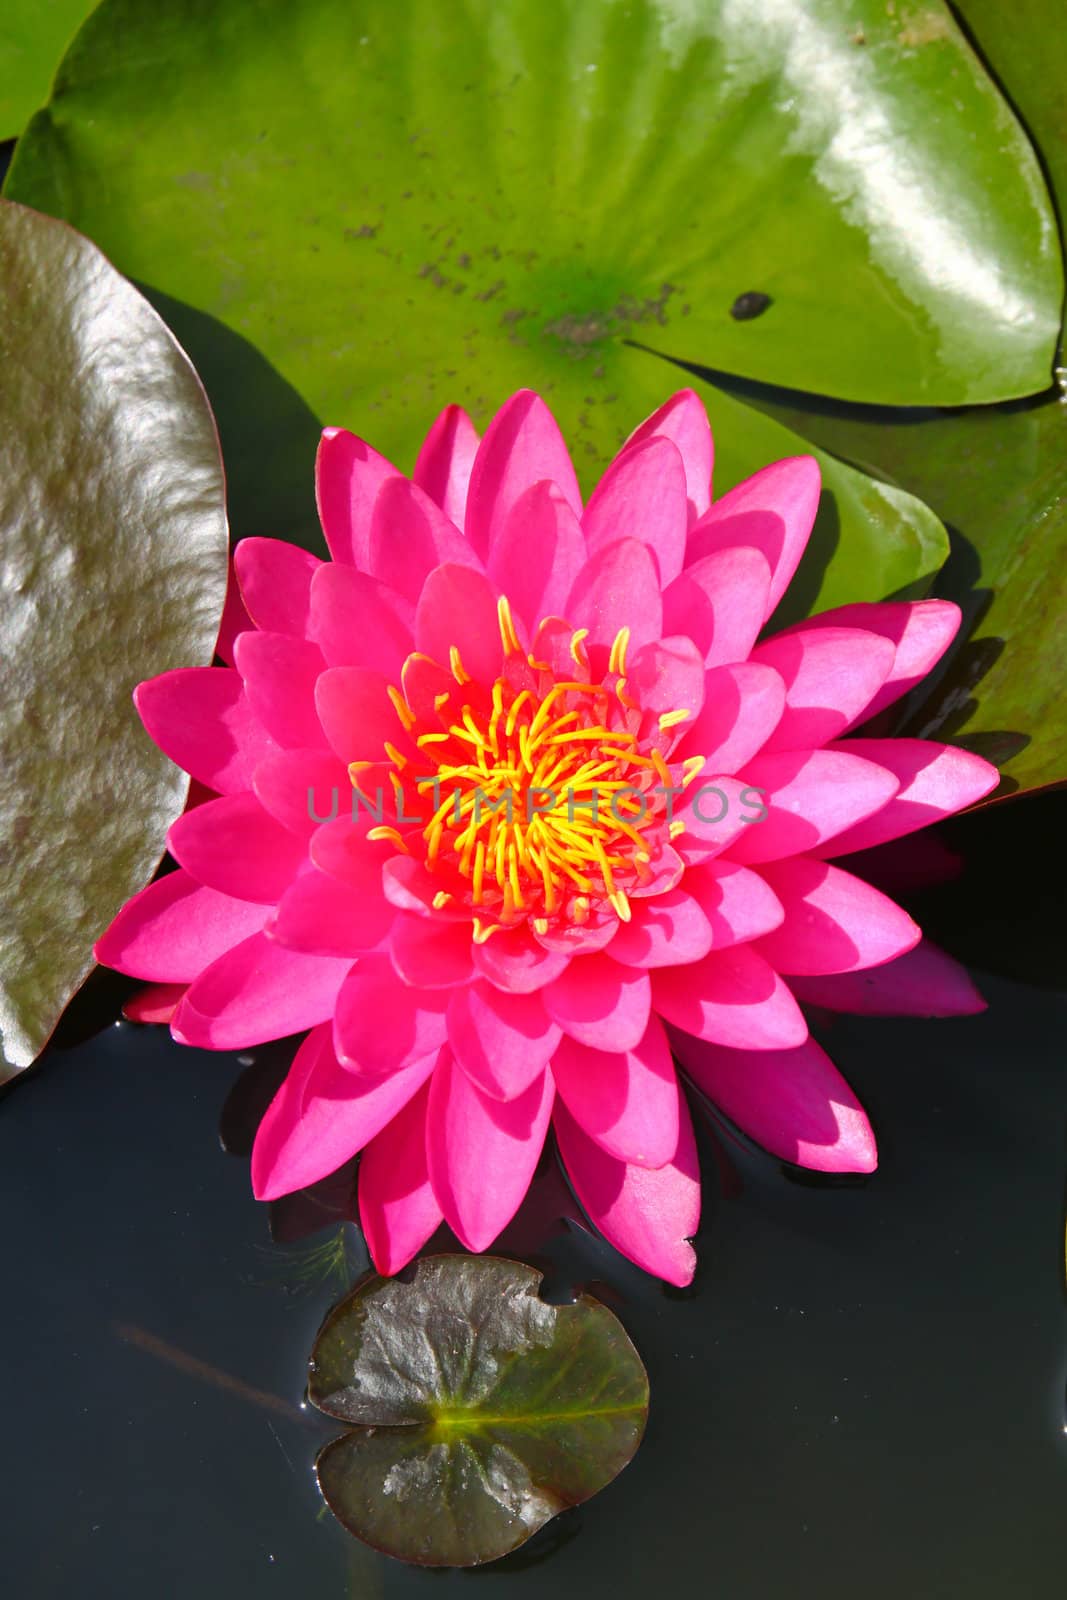 Beautiful blossom lotus flower in pond by nuchylee